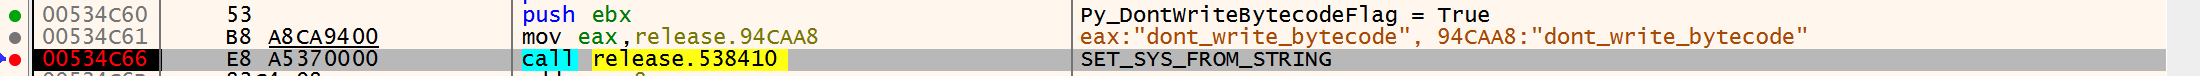 A closer look at the interpreter found that the sys.dont_write_bytecode variable had been set to true. This has the effect of preventing bytecode from being written to disk when modules are imported. 